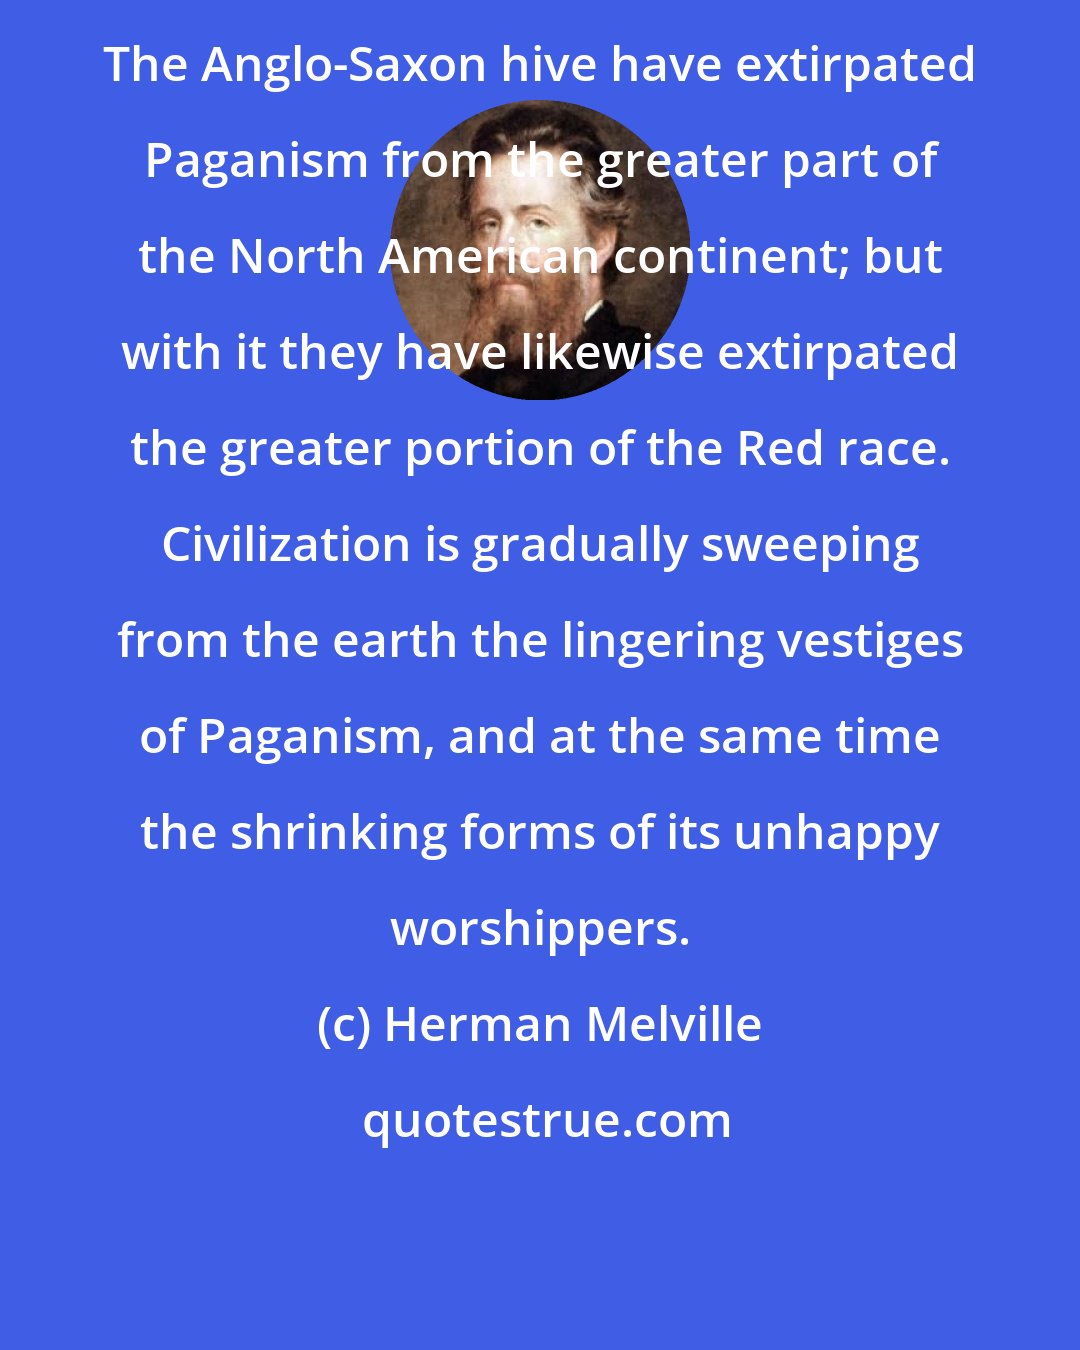 Herman Melville: The Anglo-Saxon hive have extirpated Paganism from the greater part of the North American continent; but with it they have likewise extirpated the greater portion of the Red race. Civilization is gradually sweeping from the earth the lingering vestiges of Paganism, and at the same time the shrinking forms of its unhappy worshippers.